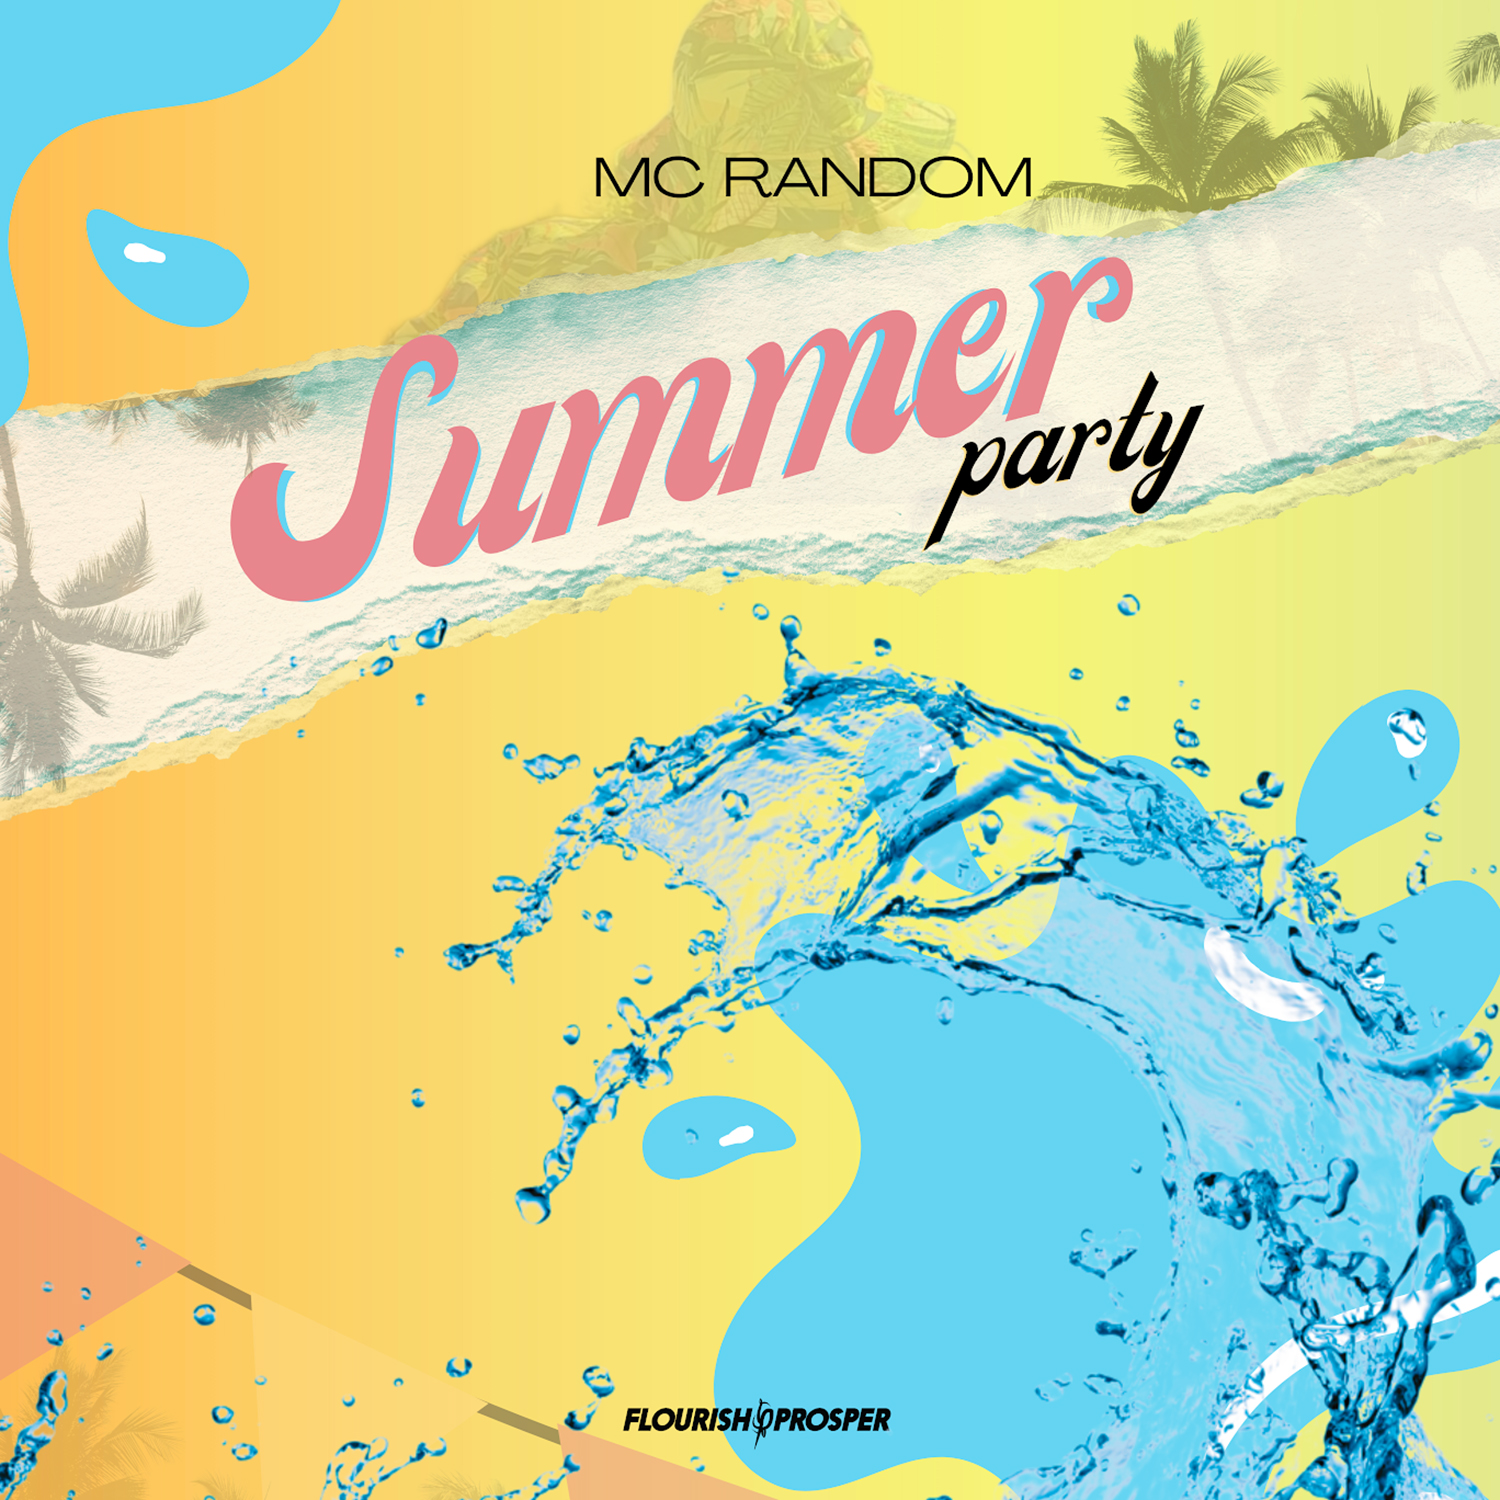 MC Random Set to Release Highly Anticipated Single "Summer Party" on August 18th.